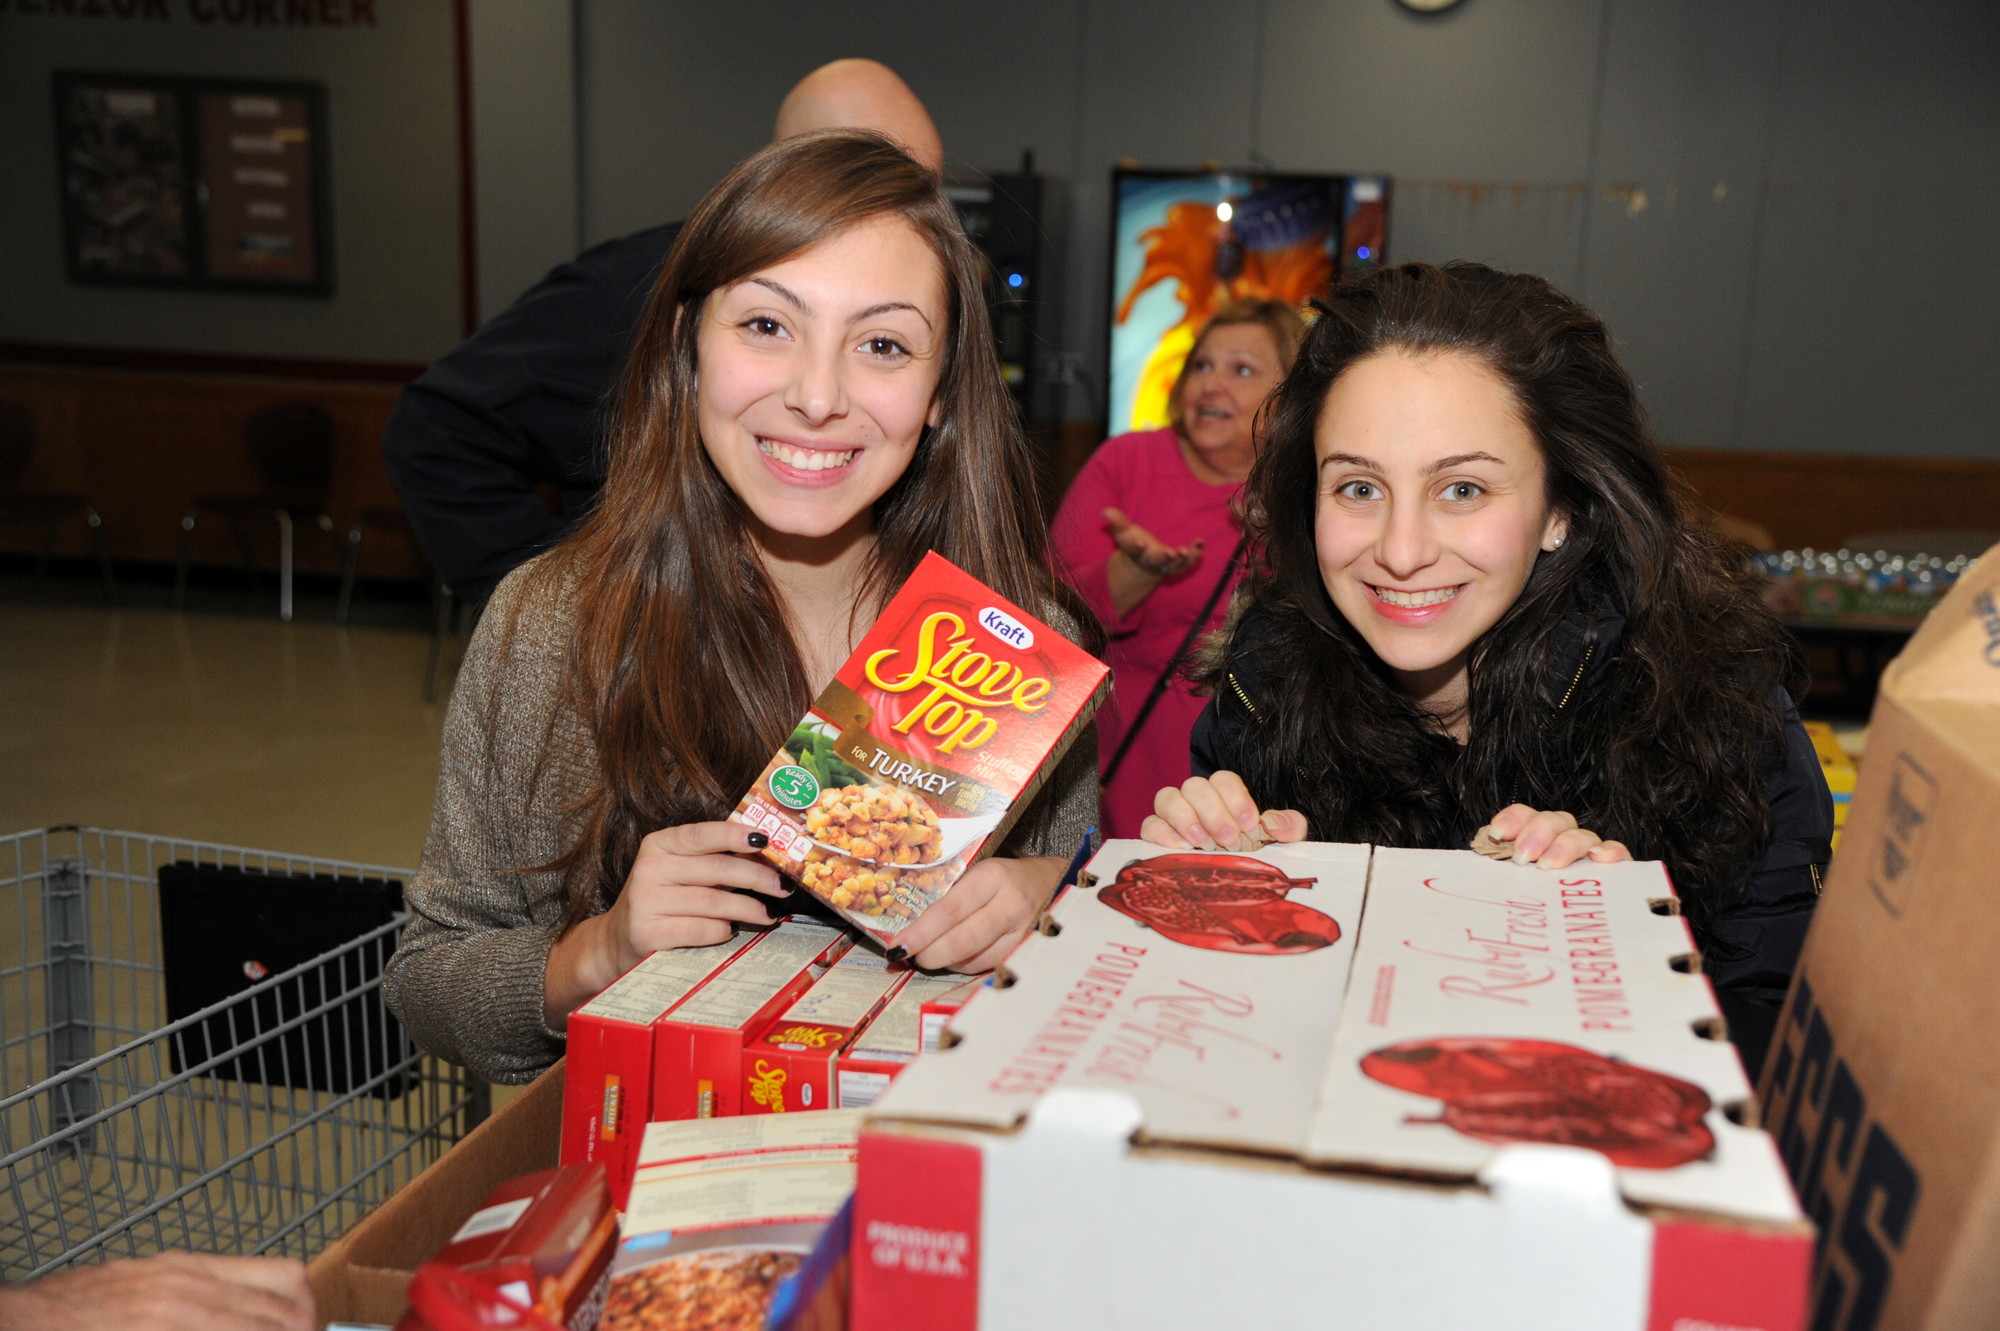 Sisters Gina and Christina Principato, both graduates of W.T. Clarke High School, returned to their old school last Friday to help the East Meadow Kiwanis Club sort food into bags, to be delivered the next morning by club members to 125 families in the local community who have fallen on hard times.